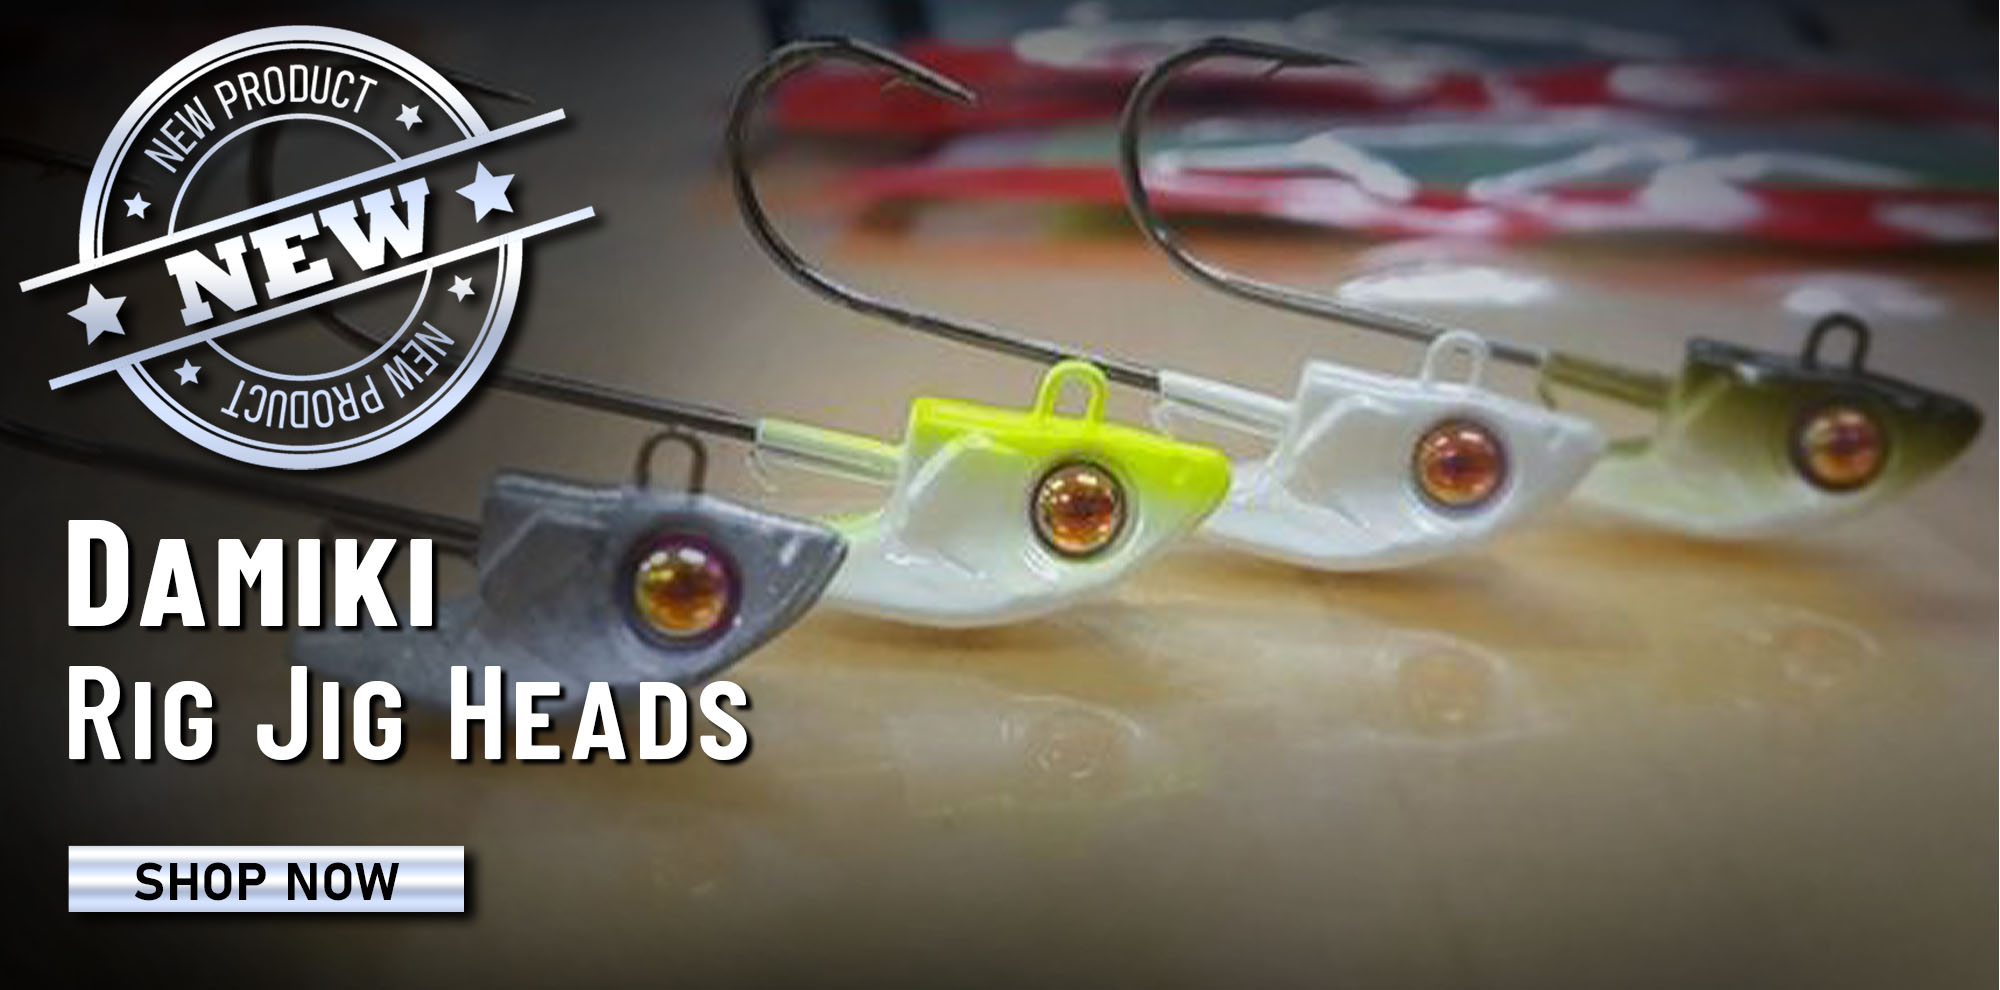 New! Damiki Rig Jig Heads Shop Now